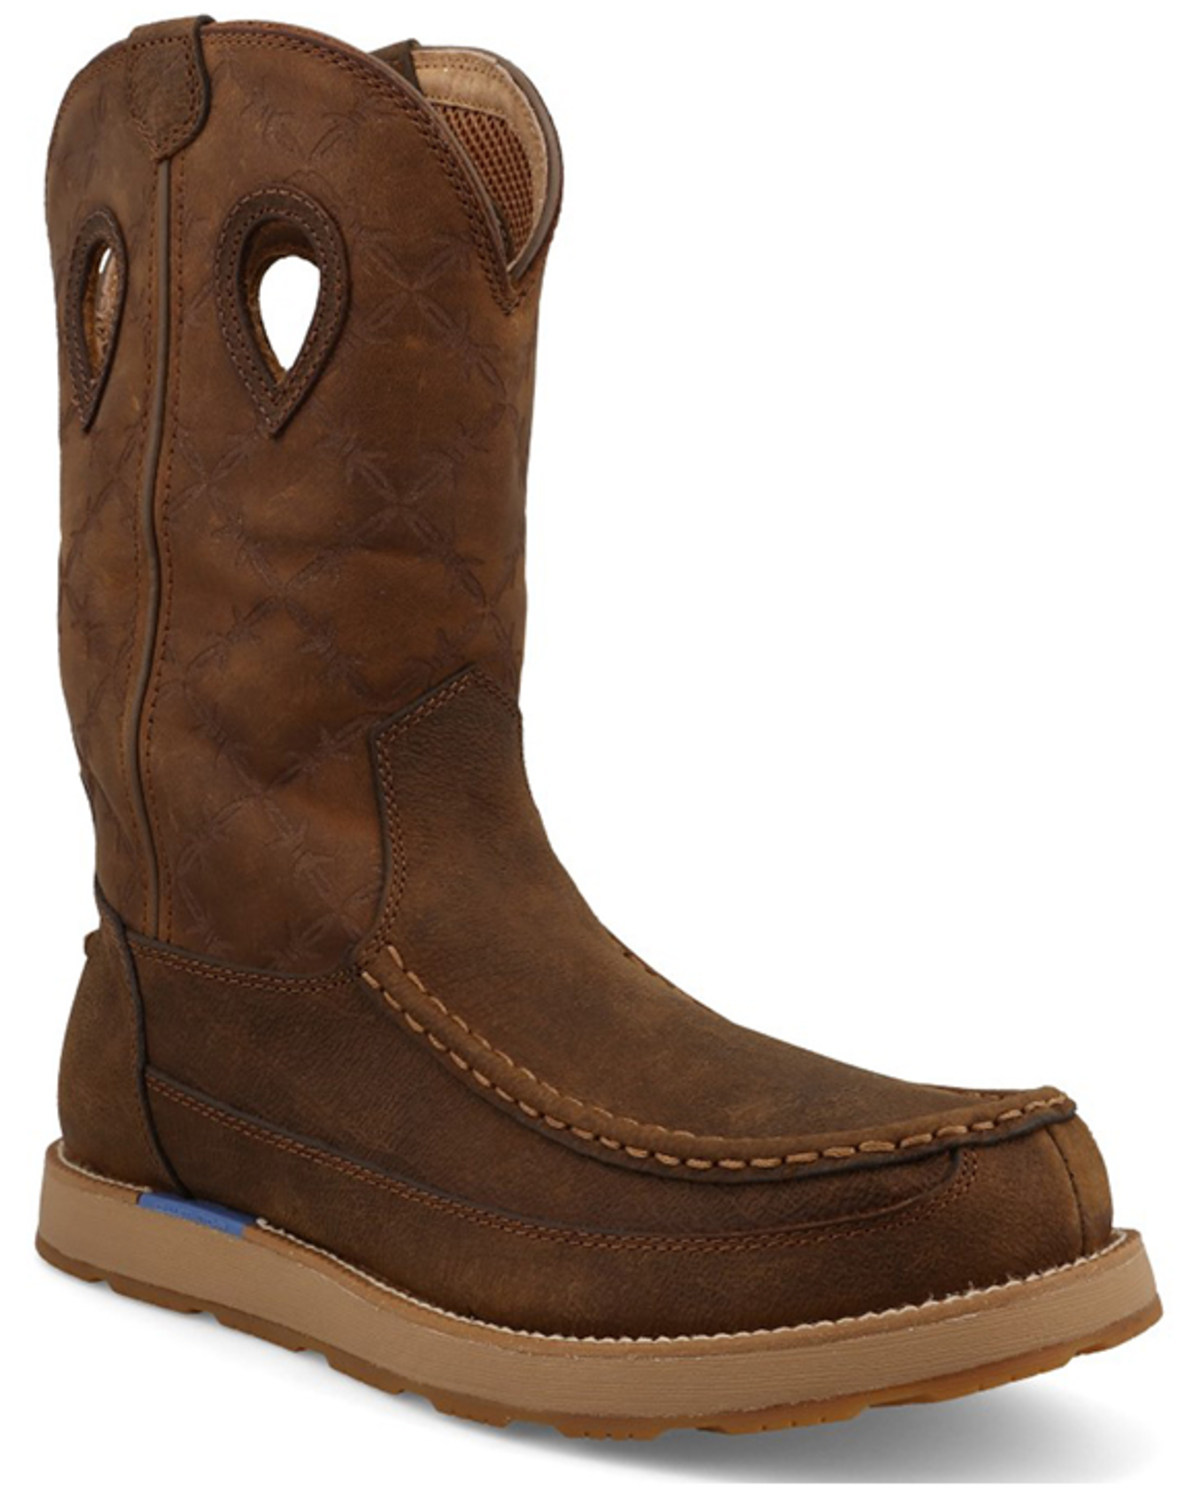 Twisted X Men's Pull-On Wedge Sole Waterproof Work Boot - Soft Toe